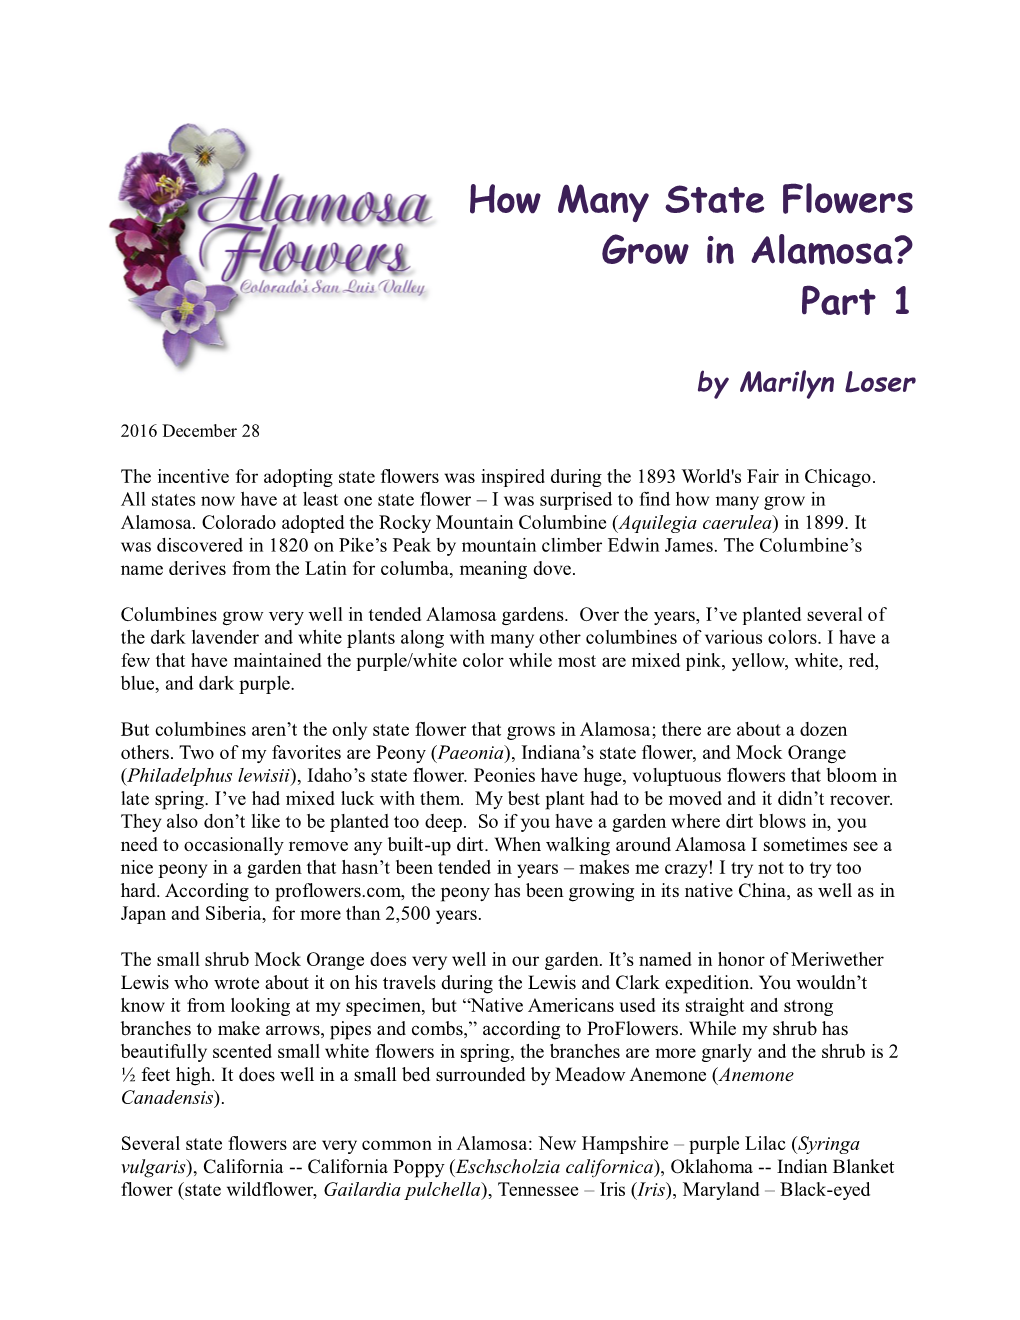 How Many State Flowers Grow in Alamosa? Part 1